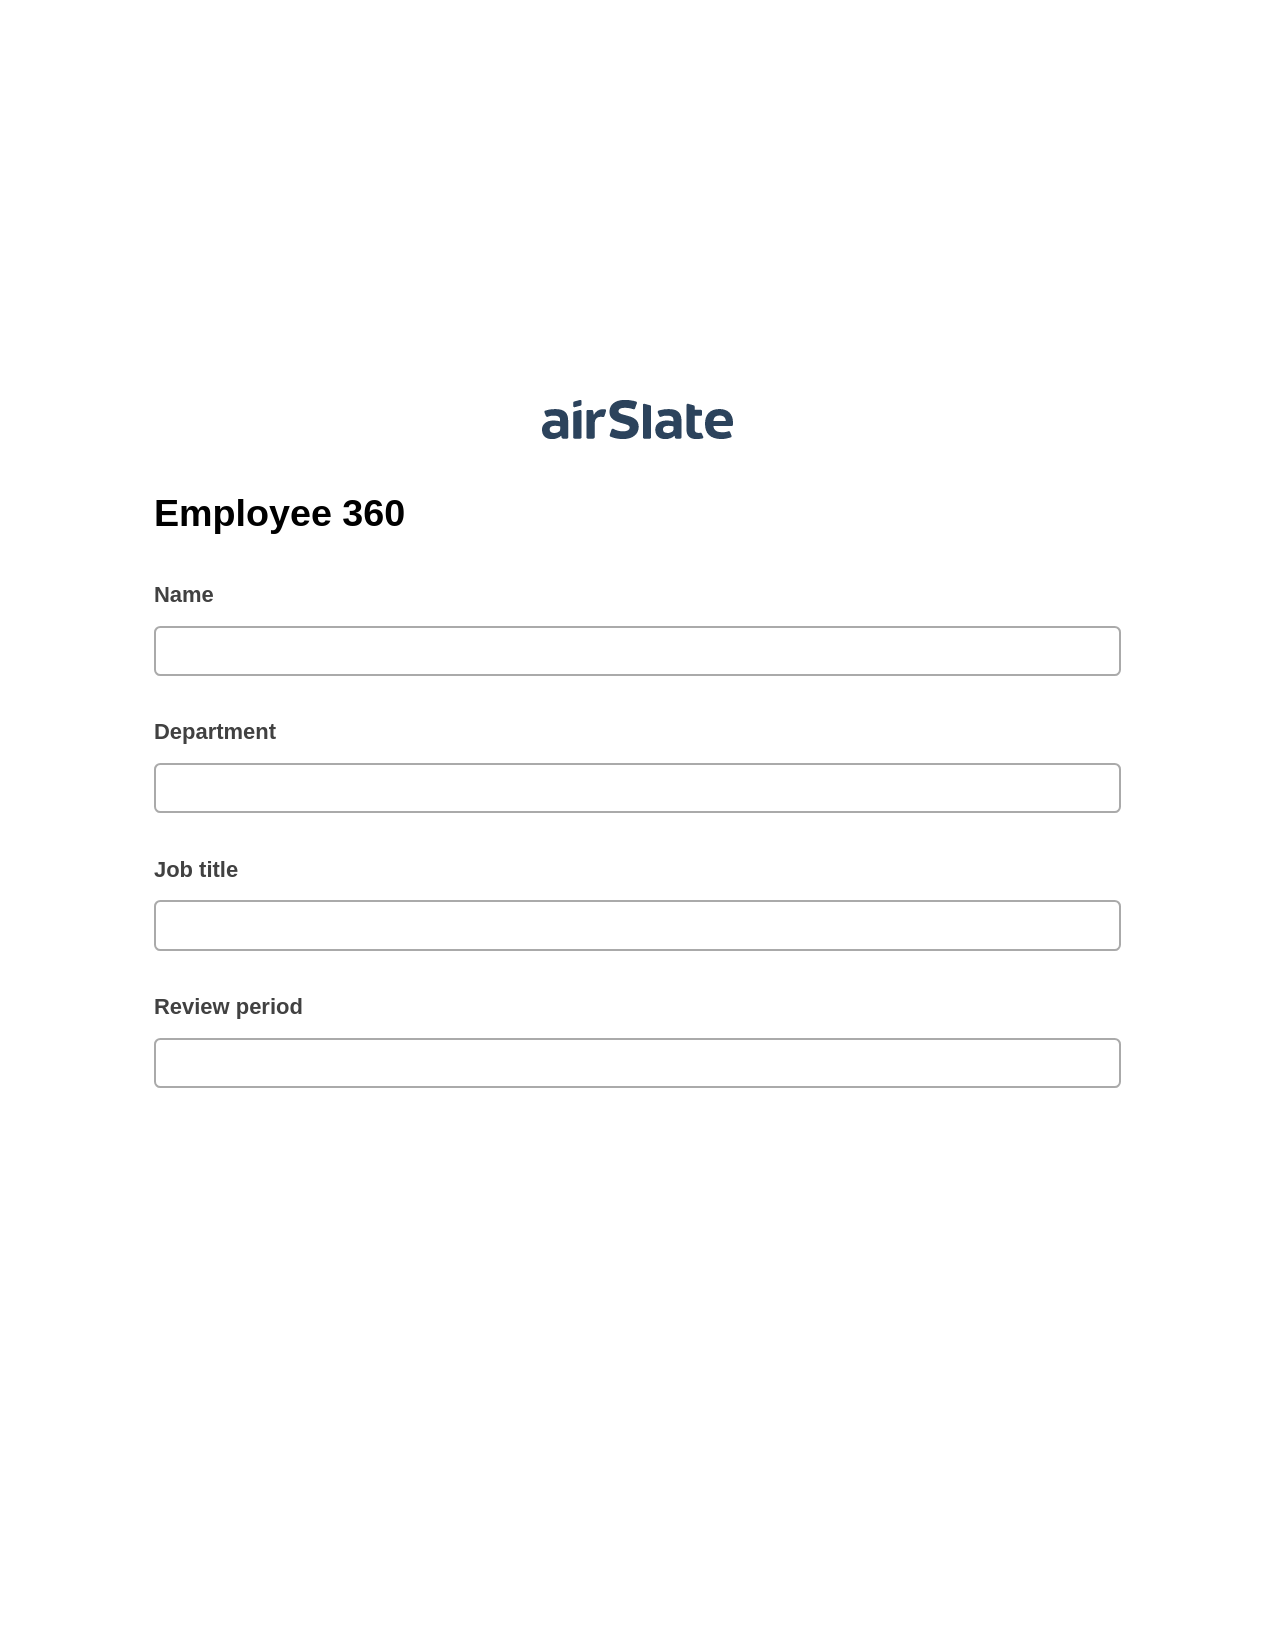 Multirole Employee 360 Pre-fill from another Slate Bot, Email Notification Bot, Export to Excel 365 Bot